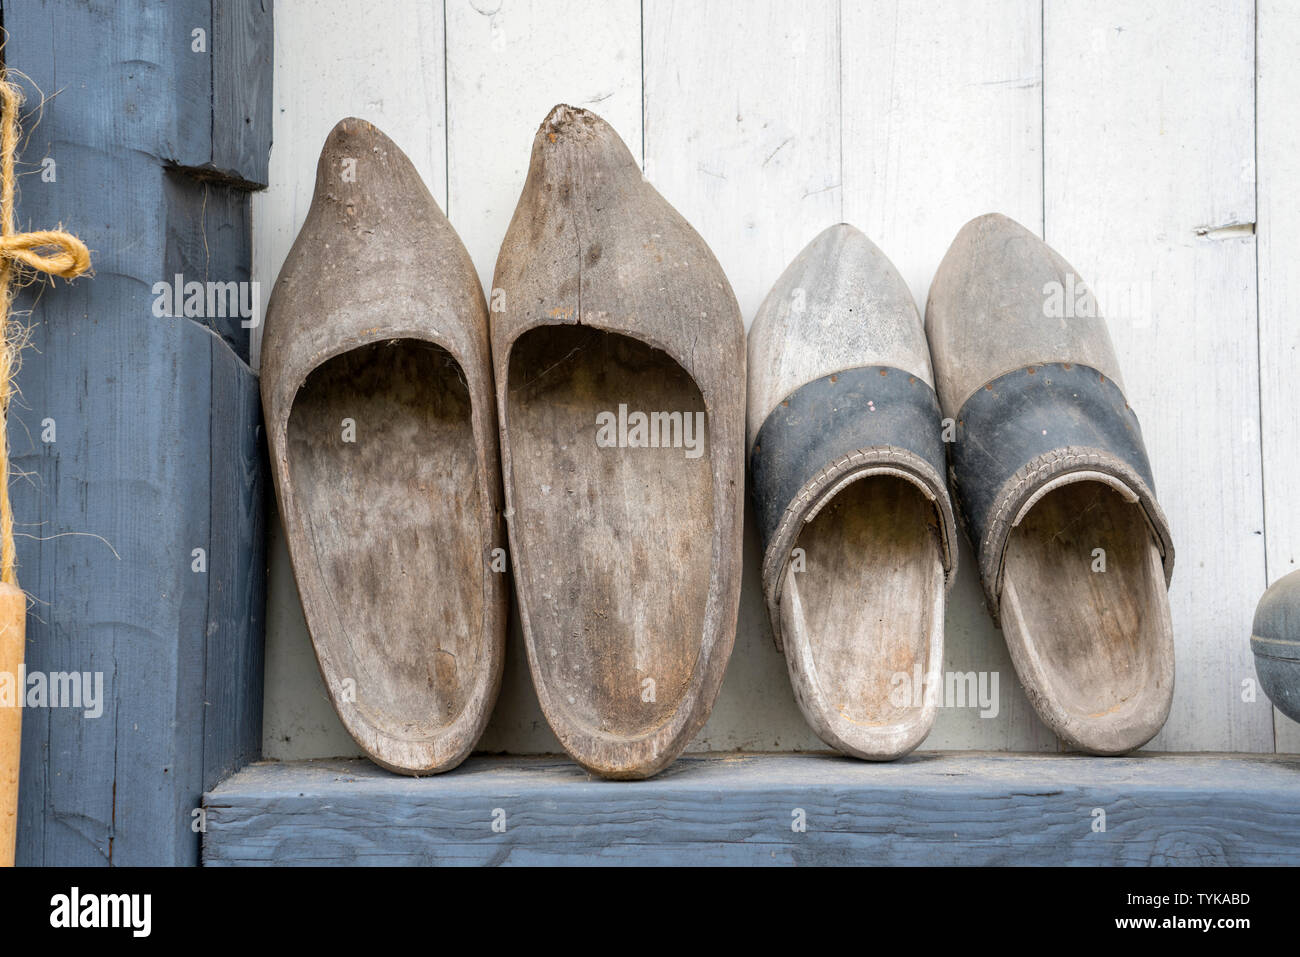 old wooden clogs, klompen from the Netherlands Stock Photo